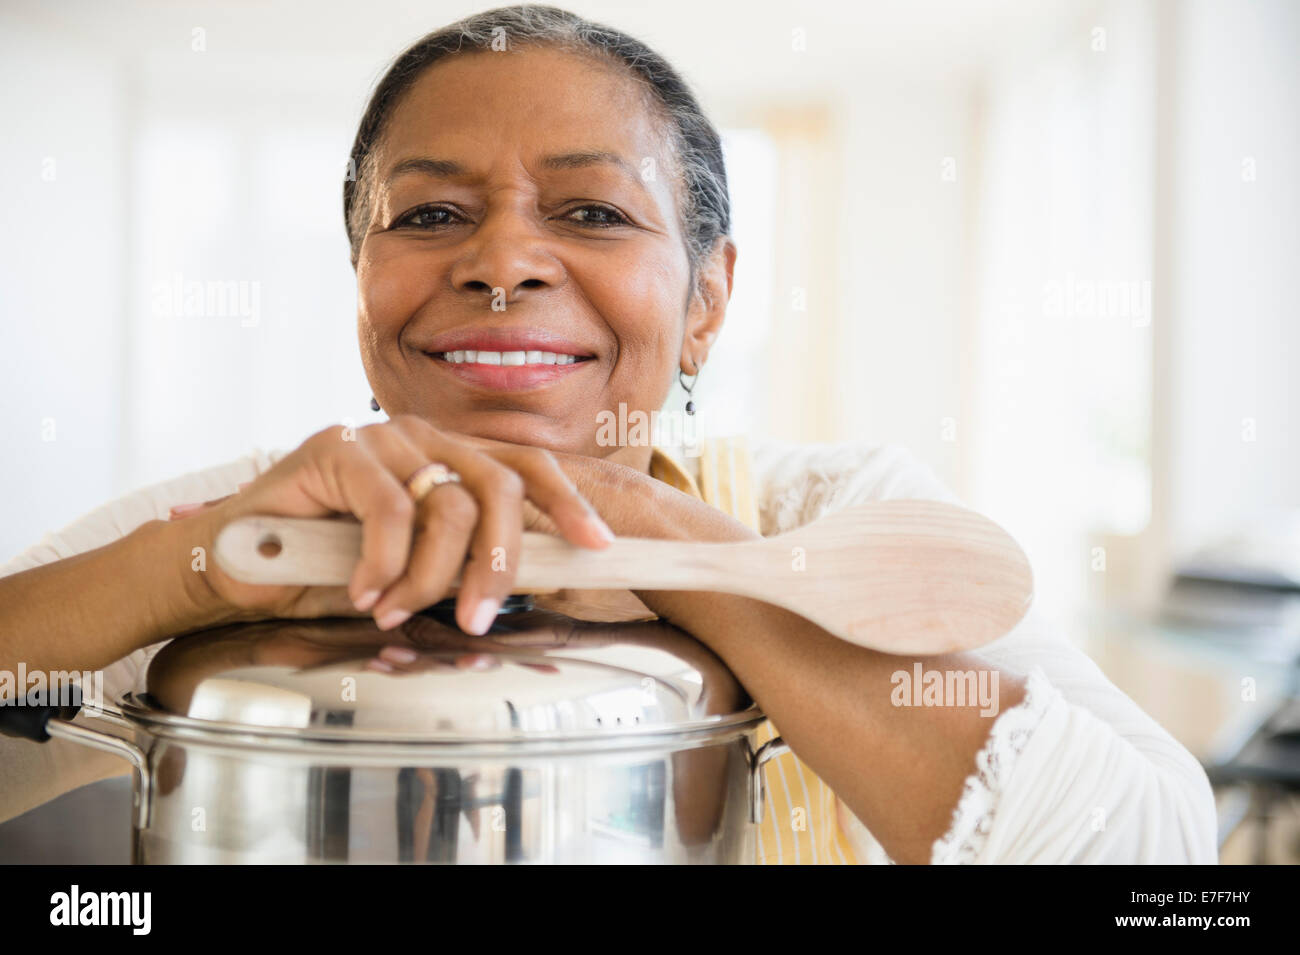 Mixed Race woman cooking in kitchen Banque D'Images